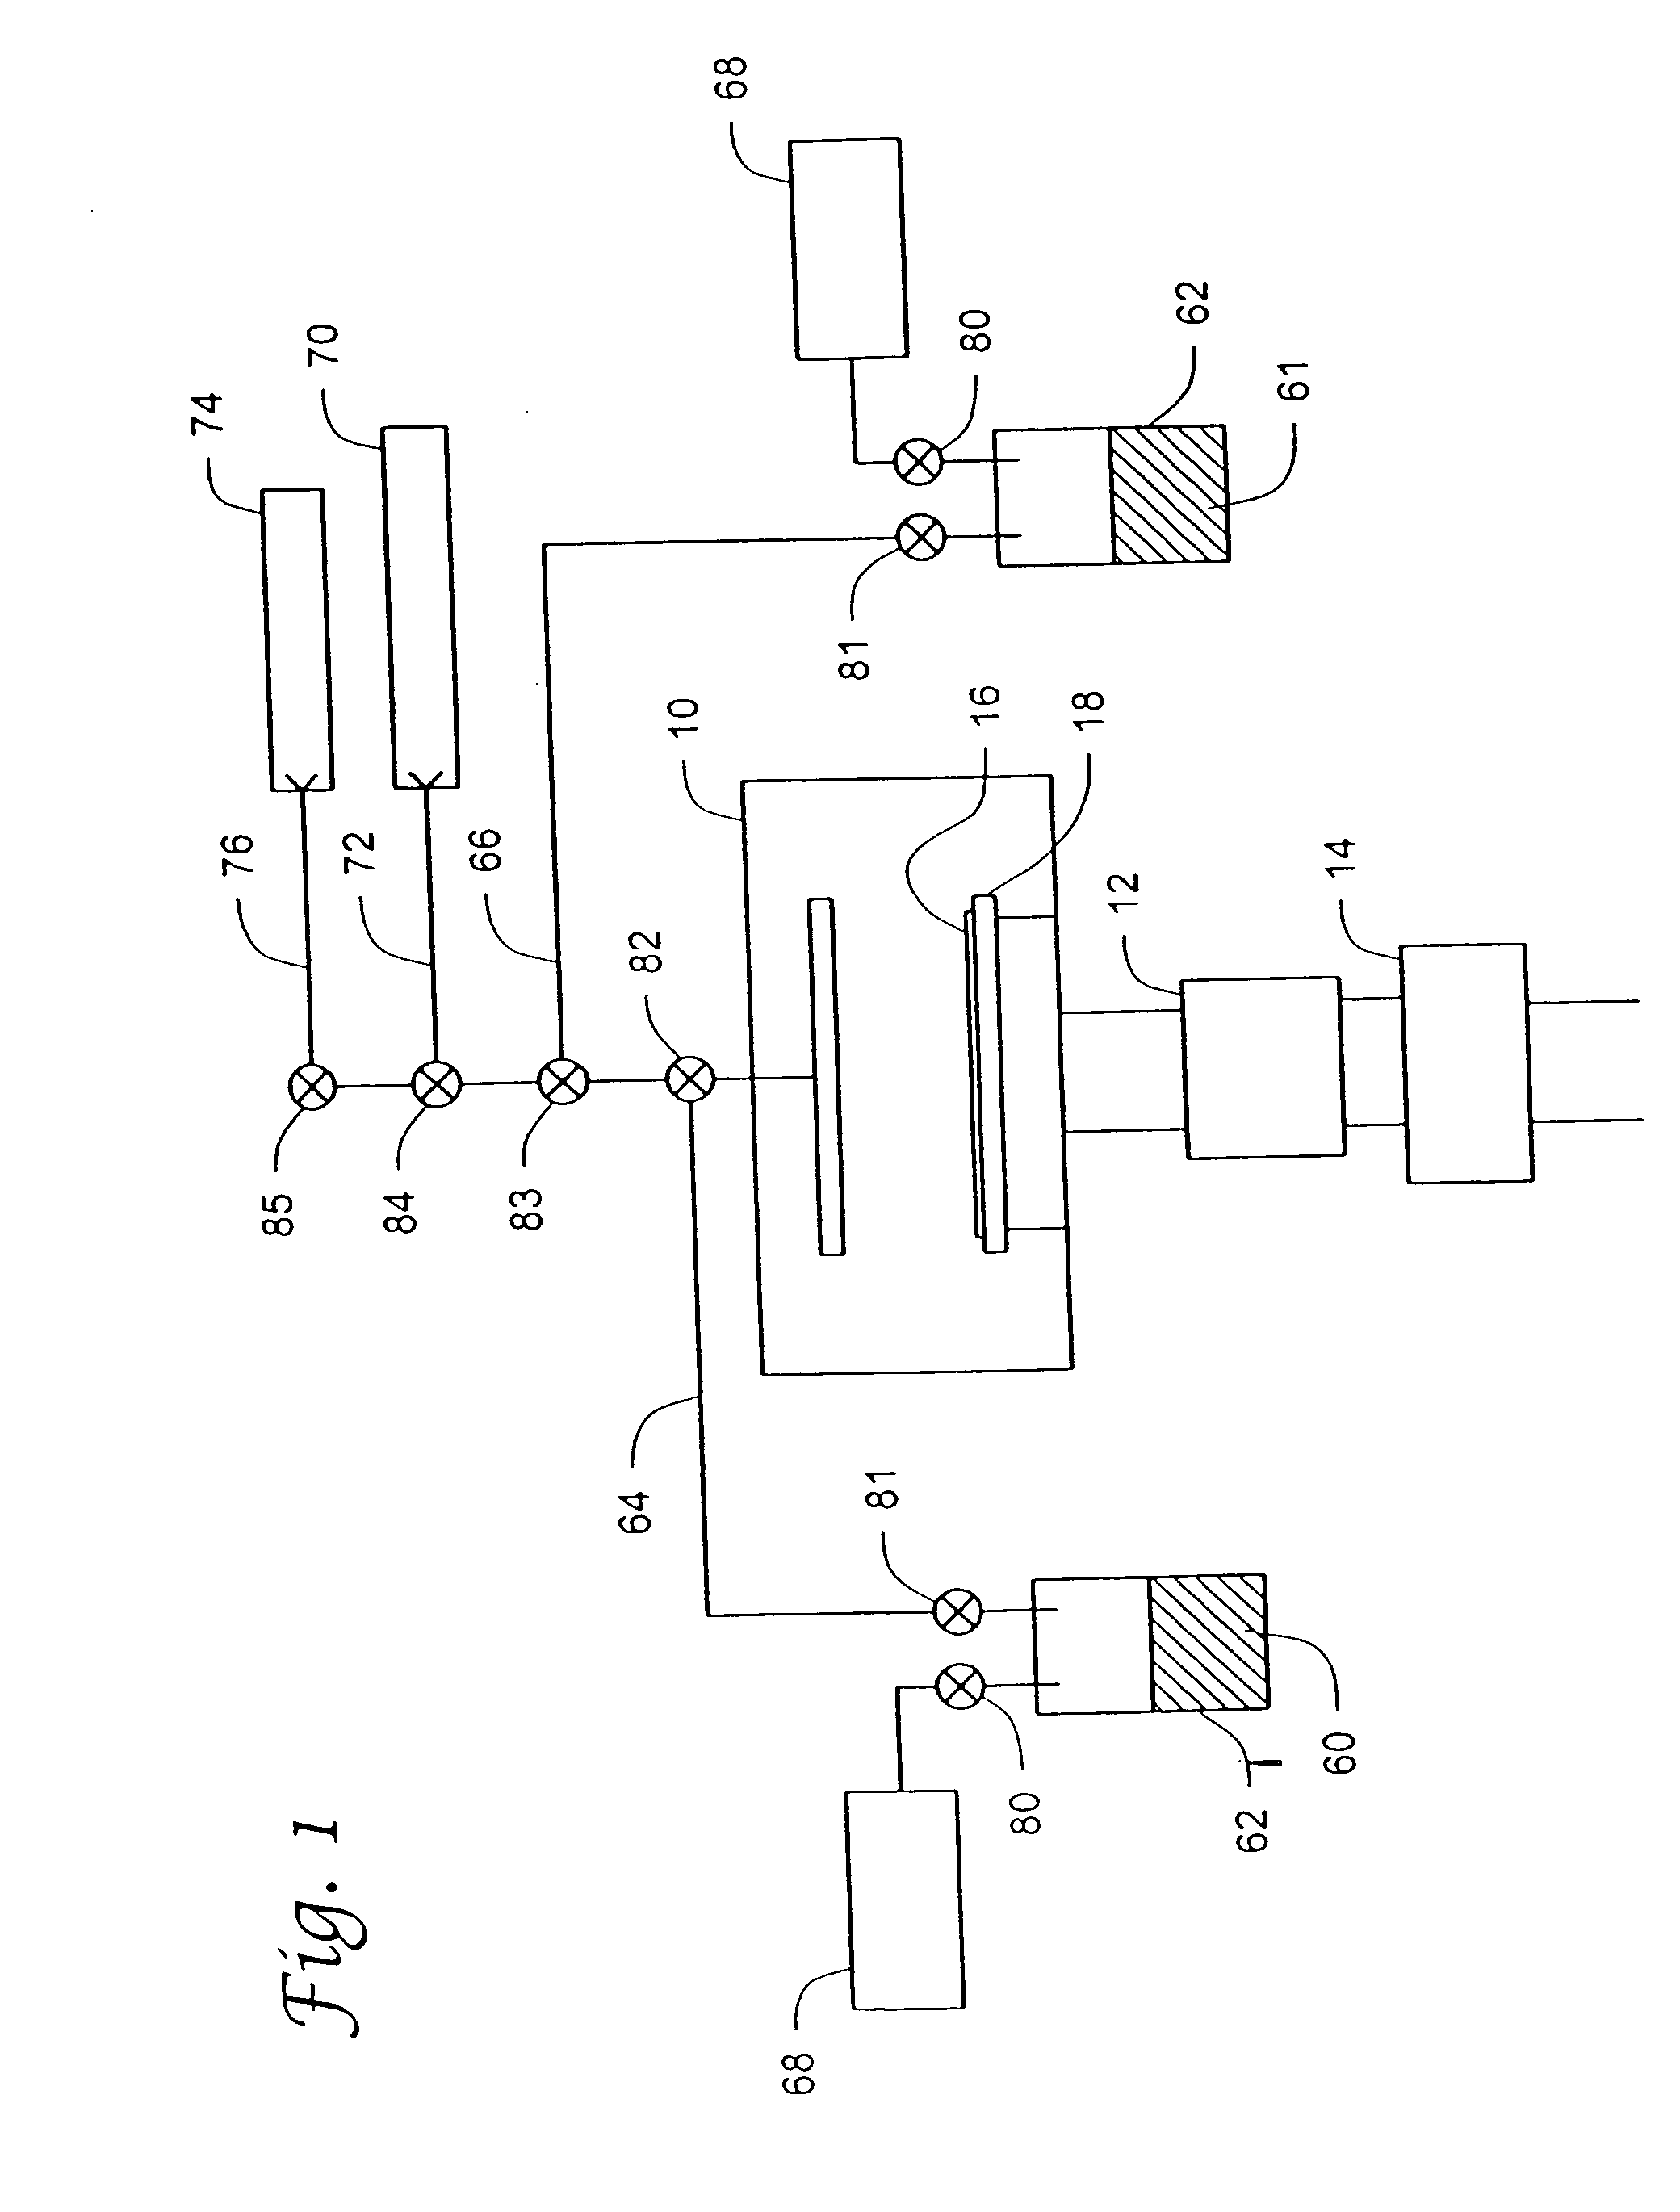 Atomic layer deposition systems and methods including metal beta-diketiminate compounds